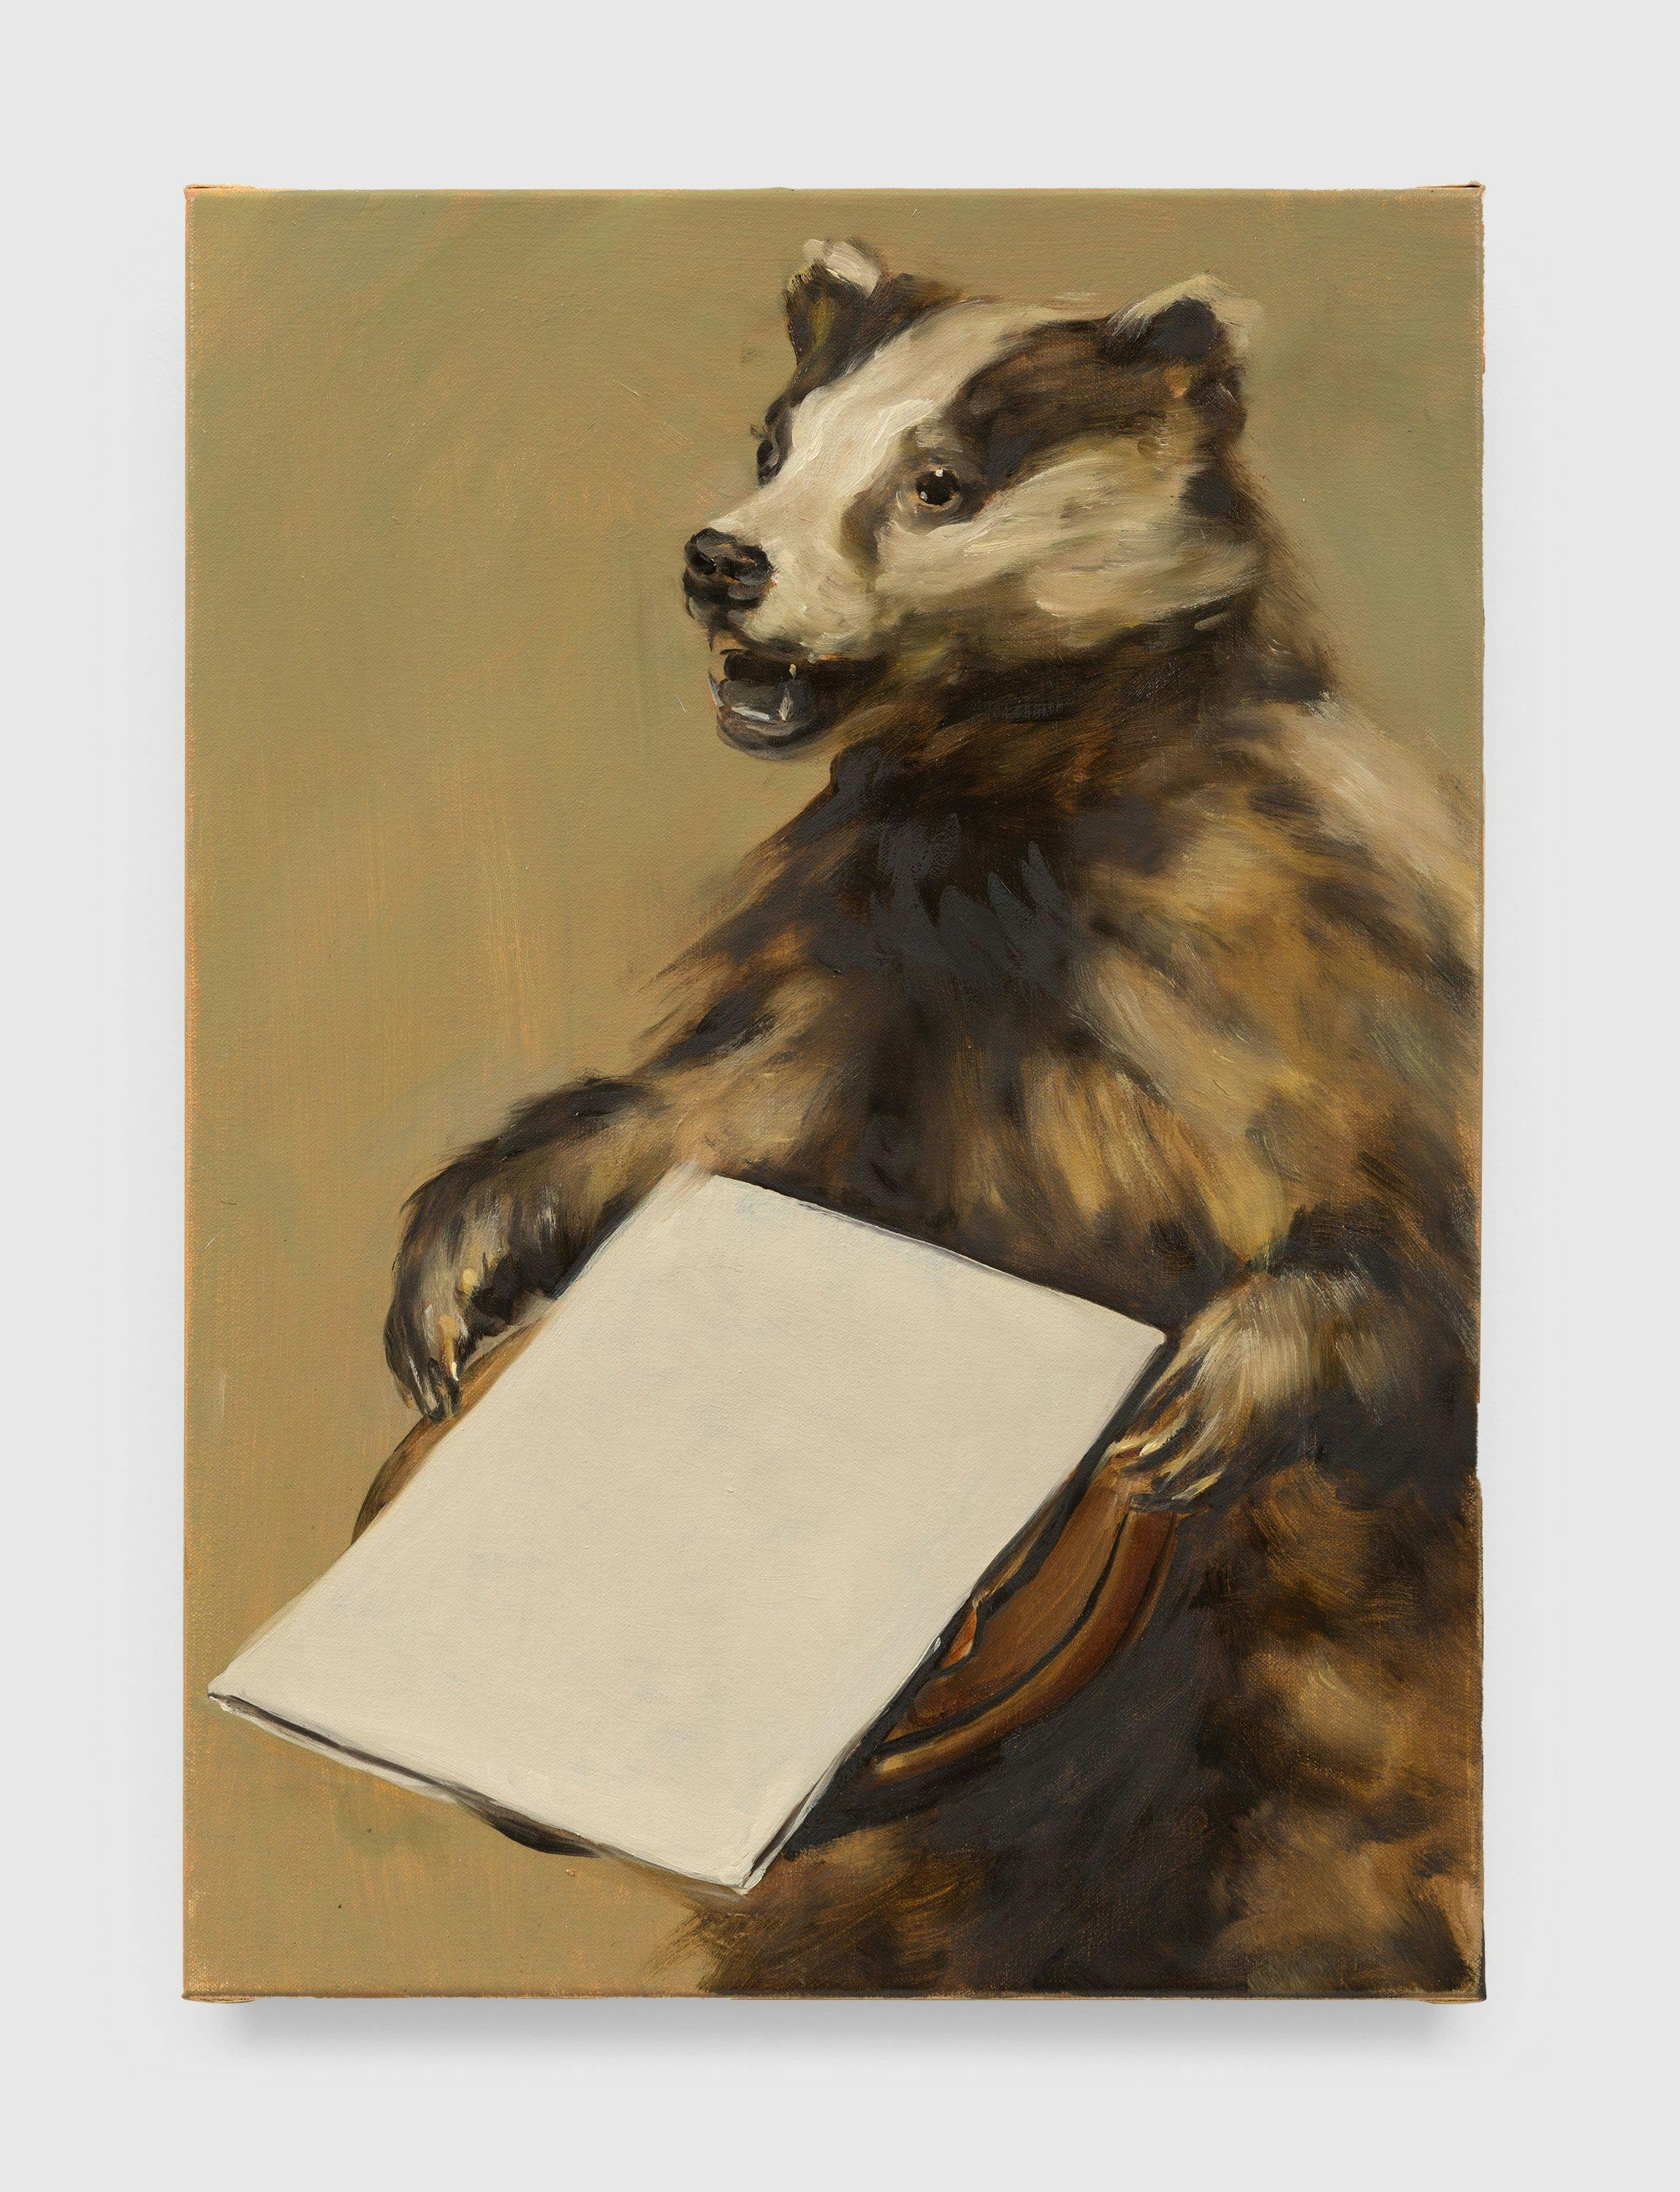 A painting by Michaël Borremans, titled Black Mould / The Badger's Song II, dated 2015.